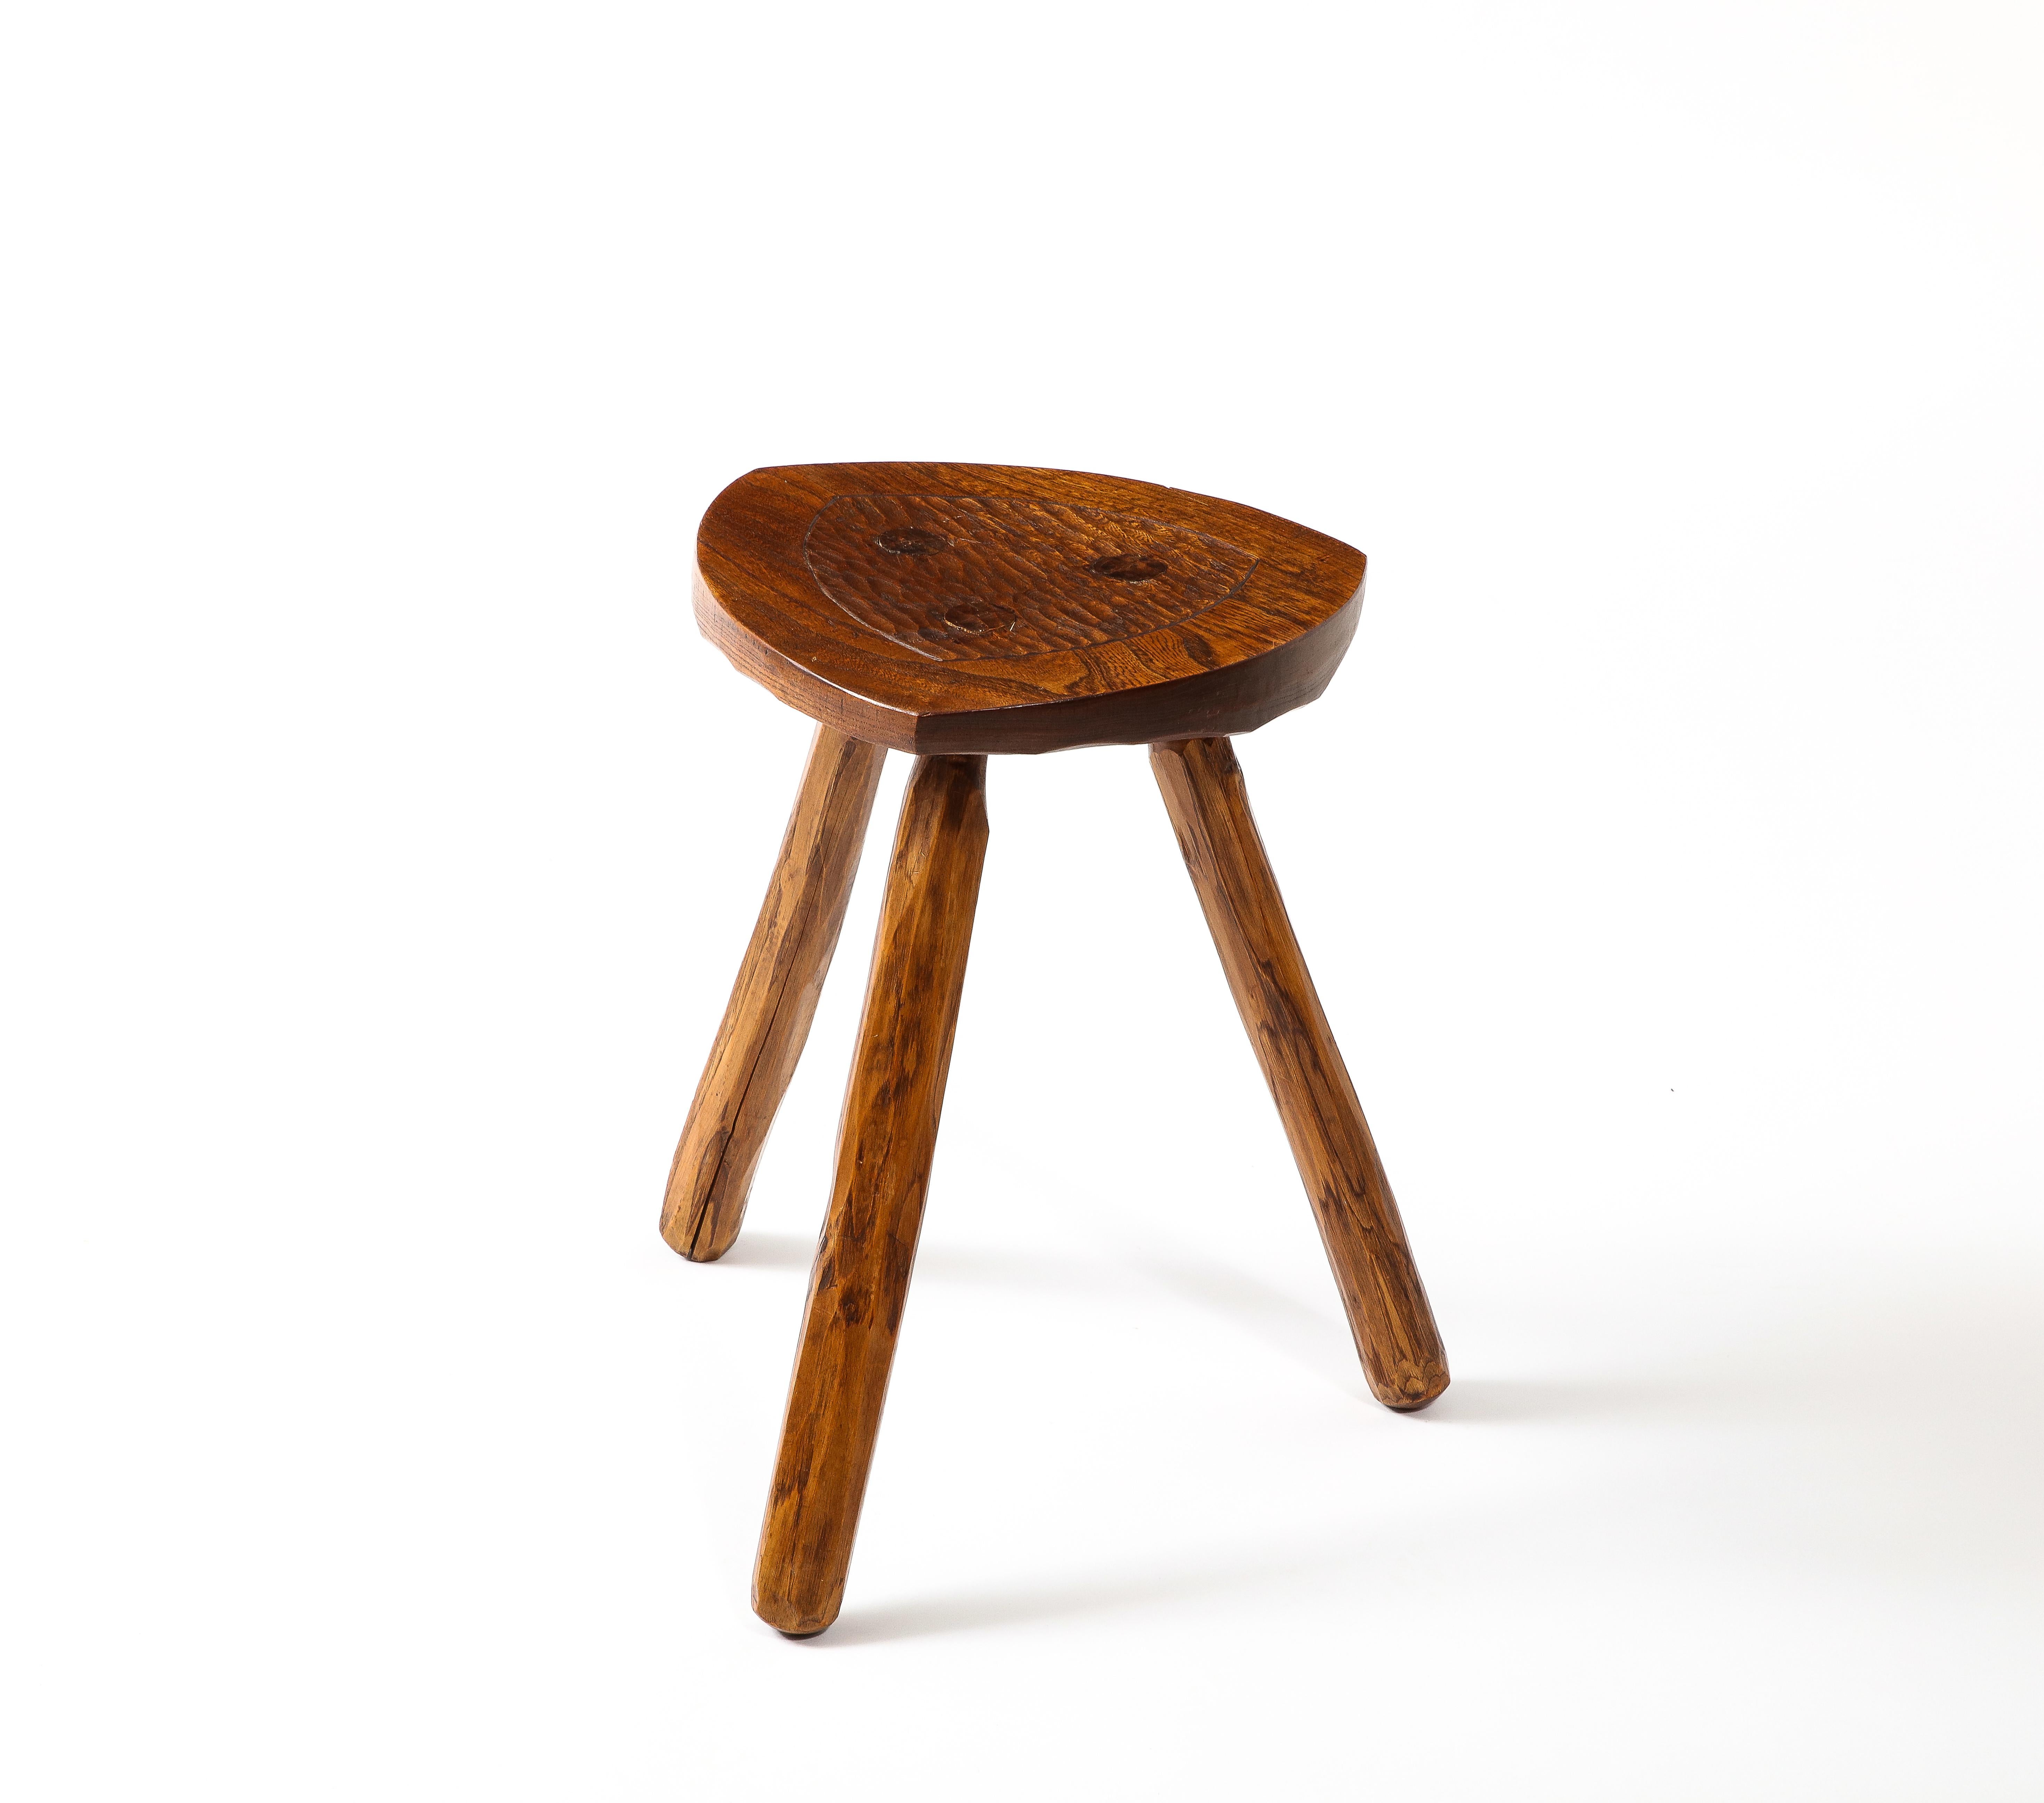 20th Century Triangular Stool in the Style of Marolles, France 1950